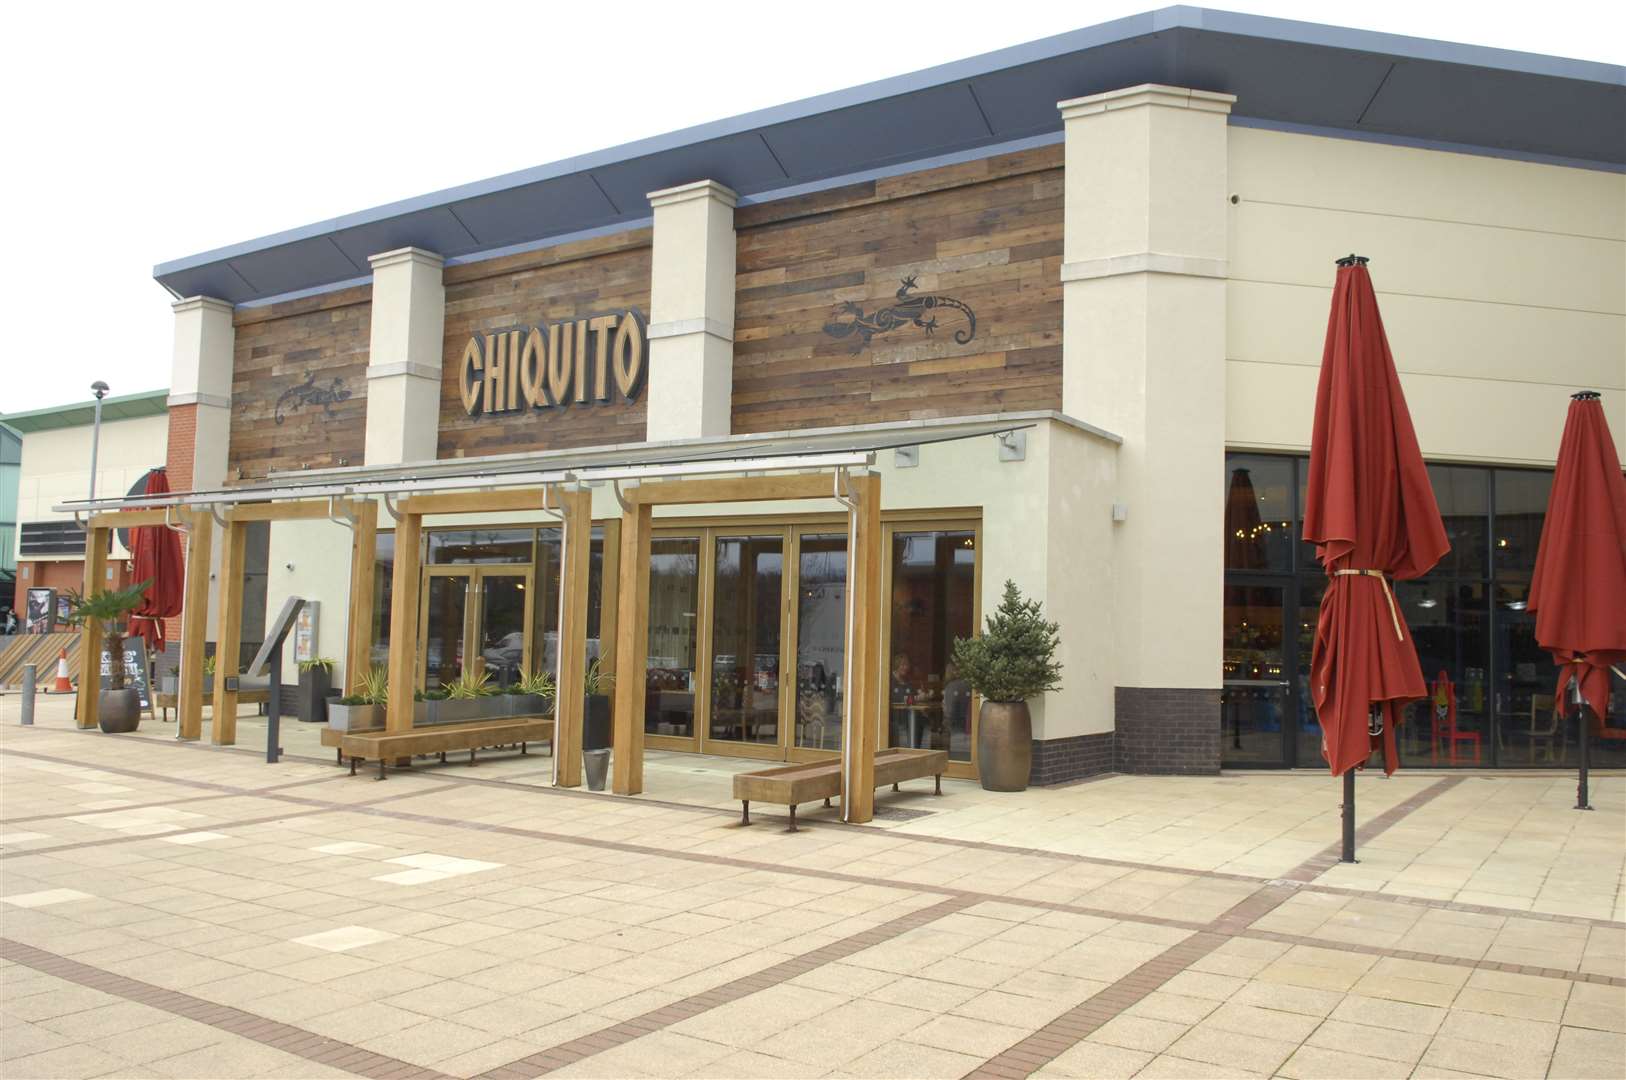 Ashford's Chiquito branch could be among those permanently shutting due to coronavirus losses